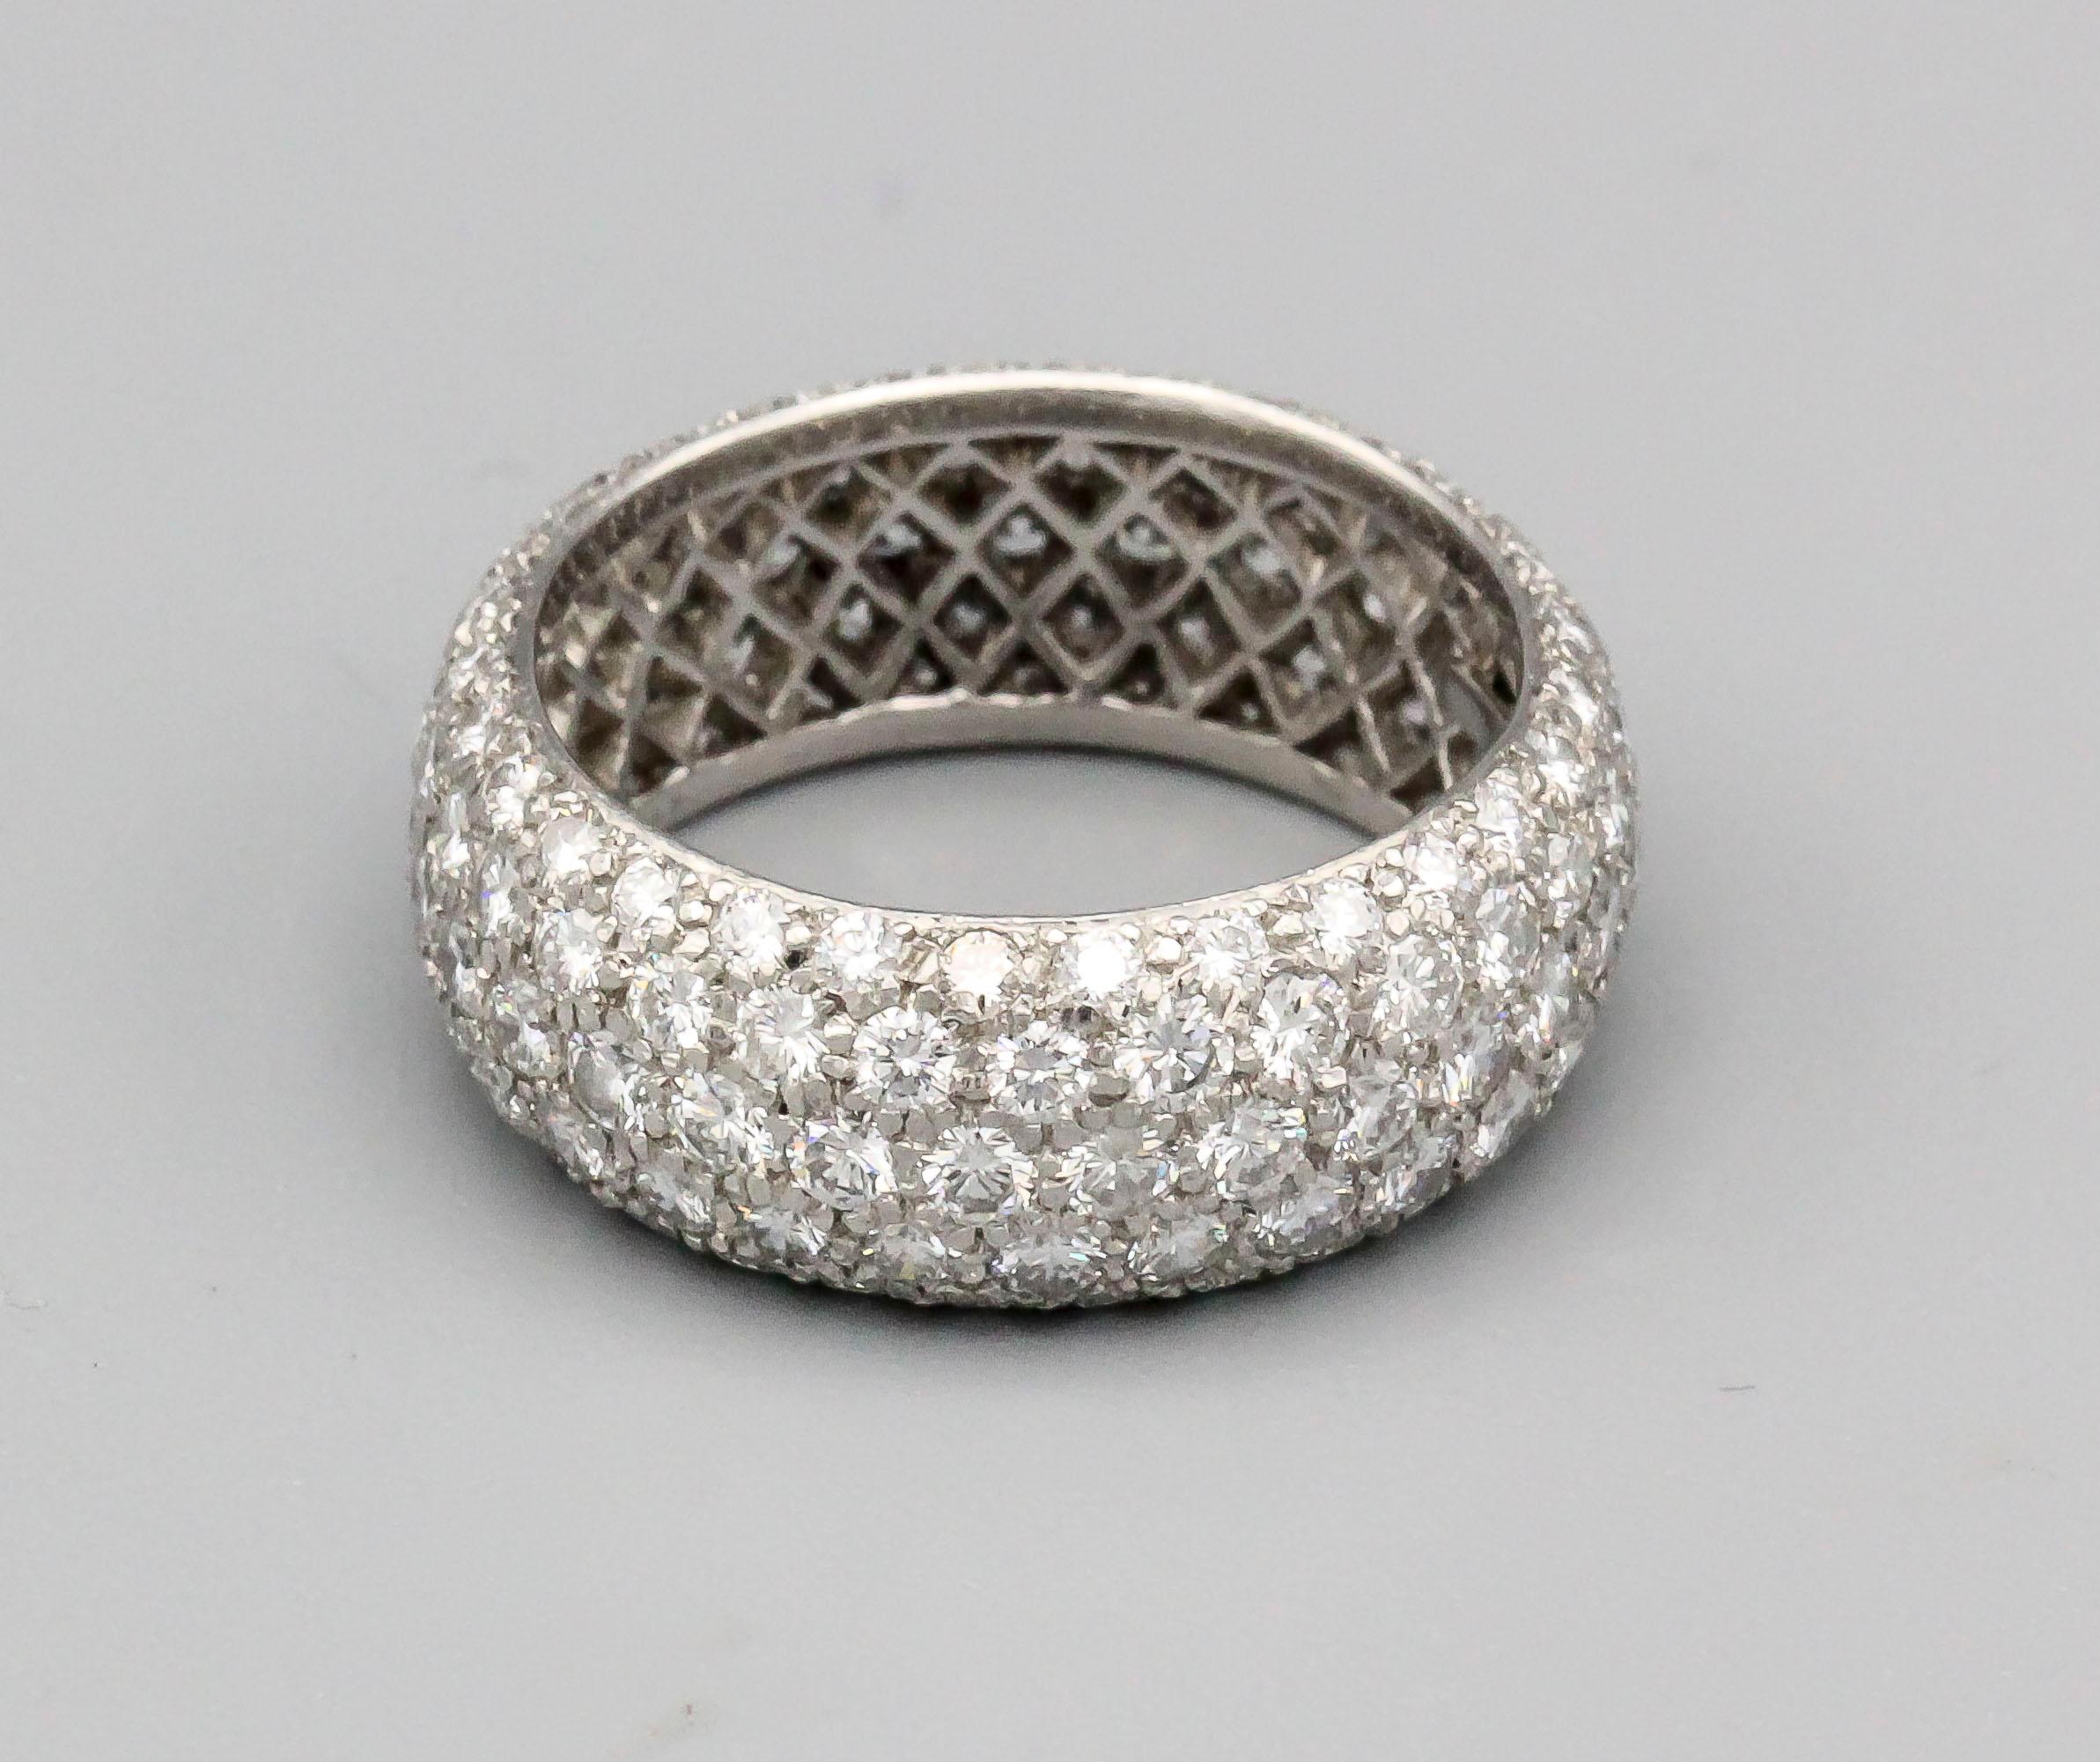 Fine platinum and diamond band by Tiffany & Co., from the current 